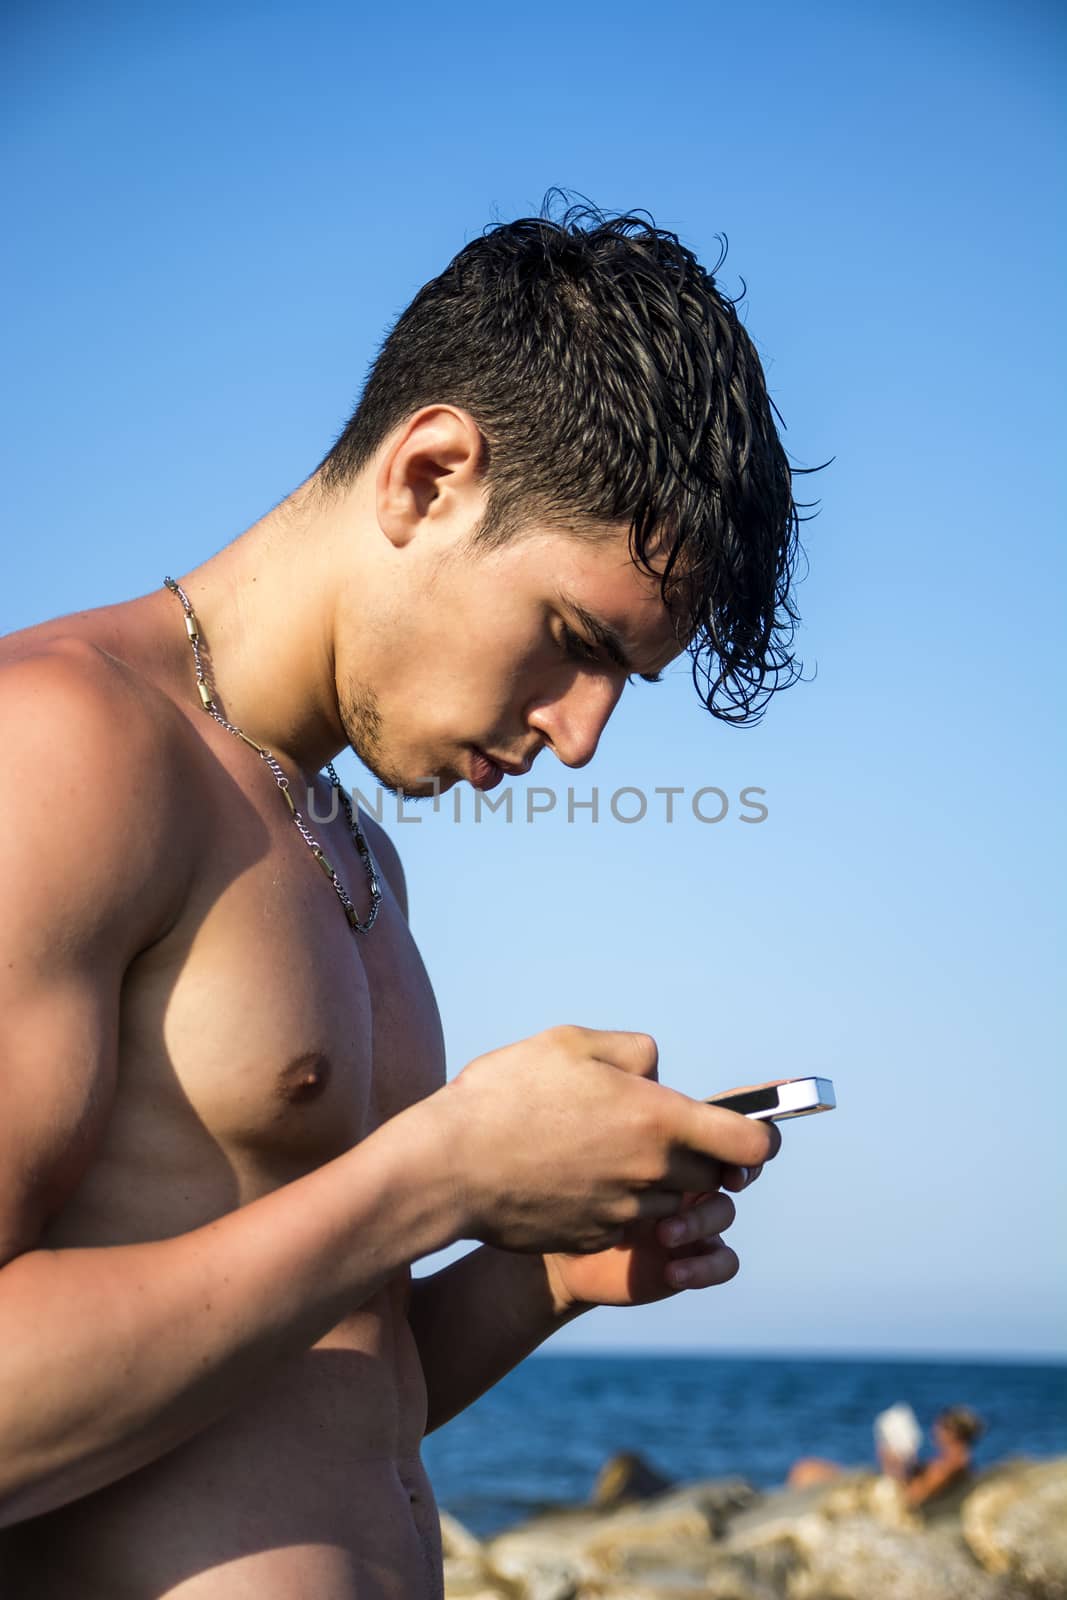 Shirtless Young Handsome Man Busy with his Mobile Phone While Standing at the Beach Boulders next to Sea or Ocean